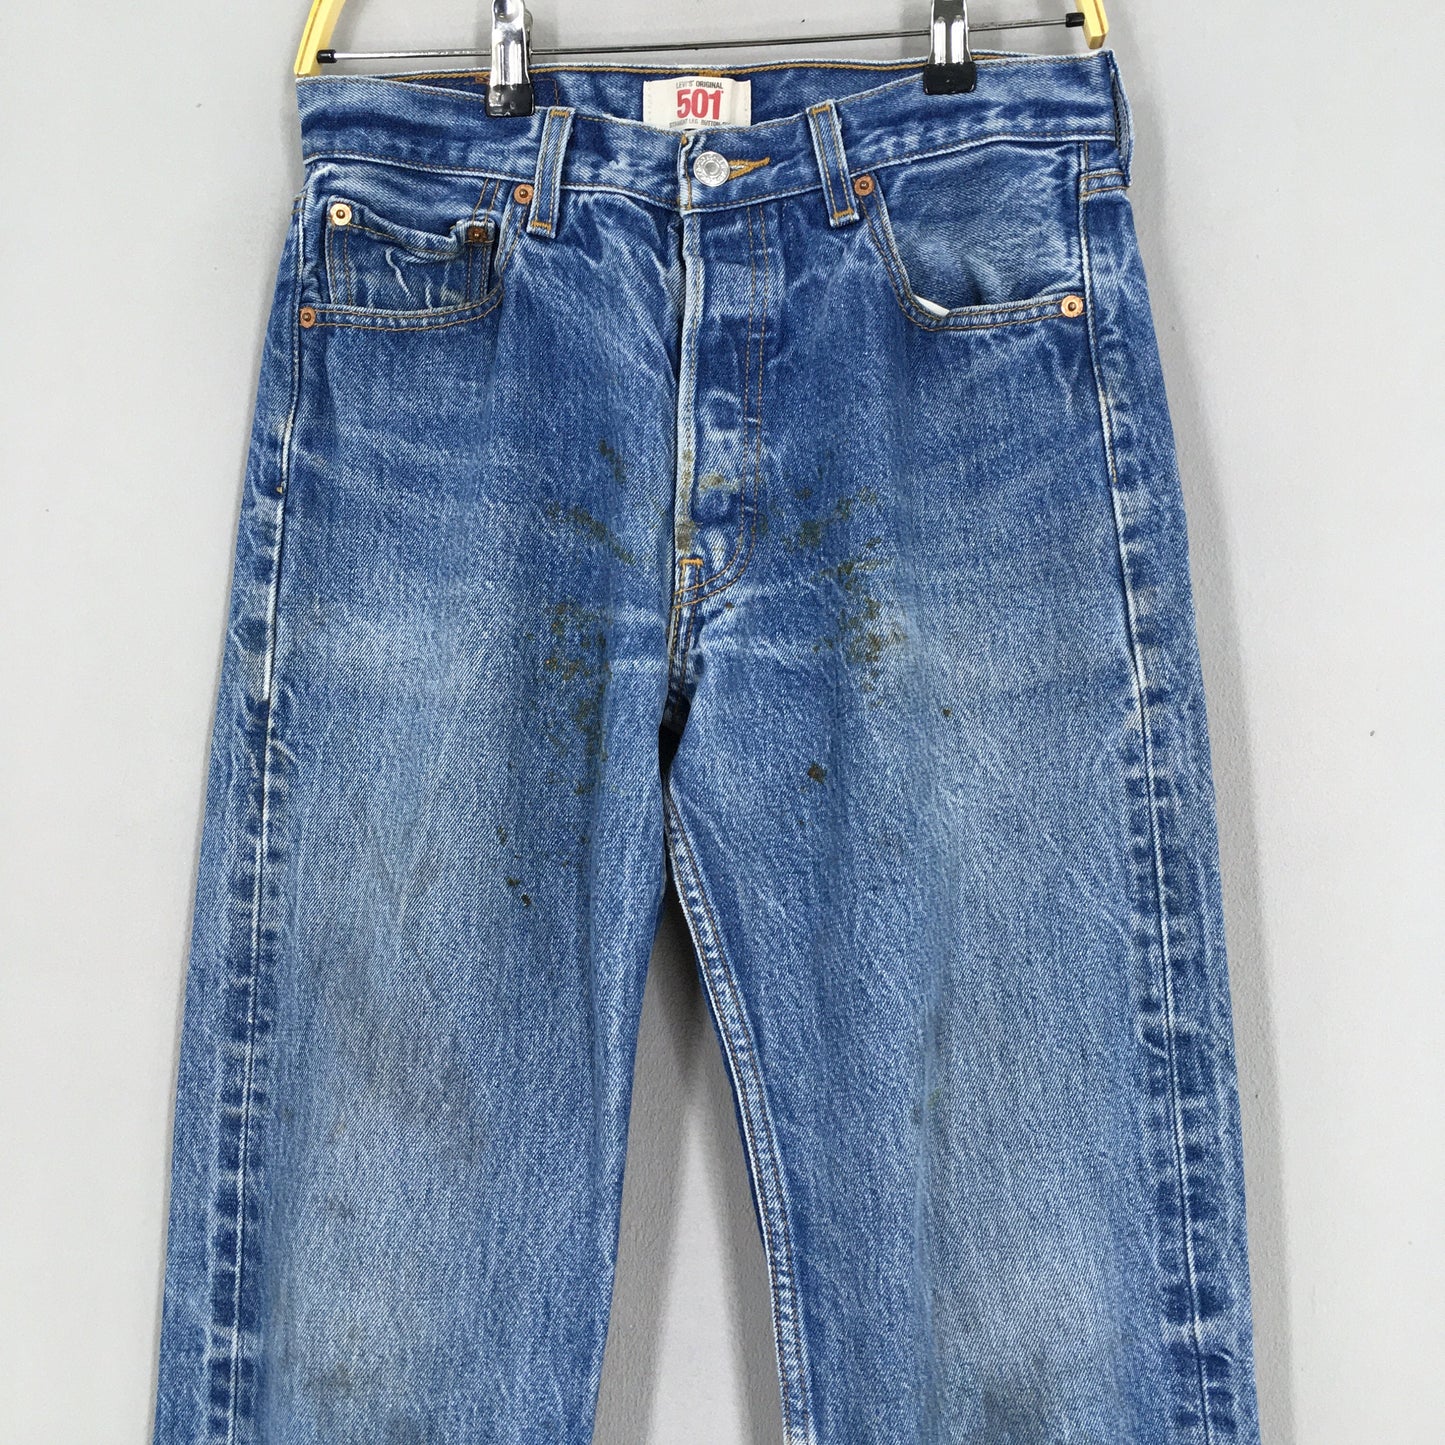 Levi's 501 Faded Dirty Blue Jeans Size 27x31